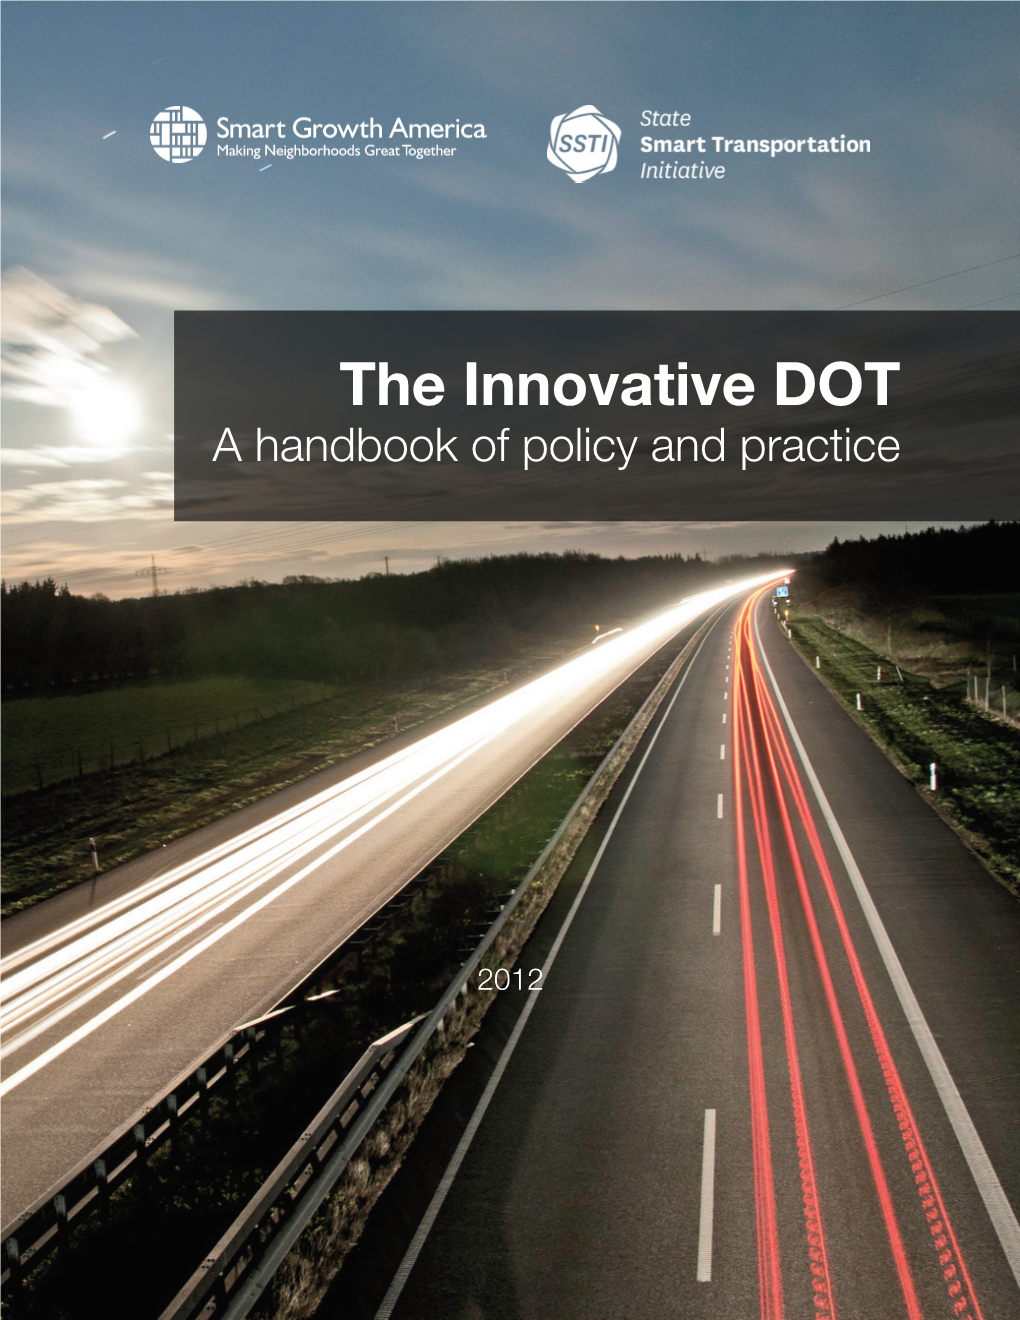 The Innovative DOT: a Handbook of Policy and Practice